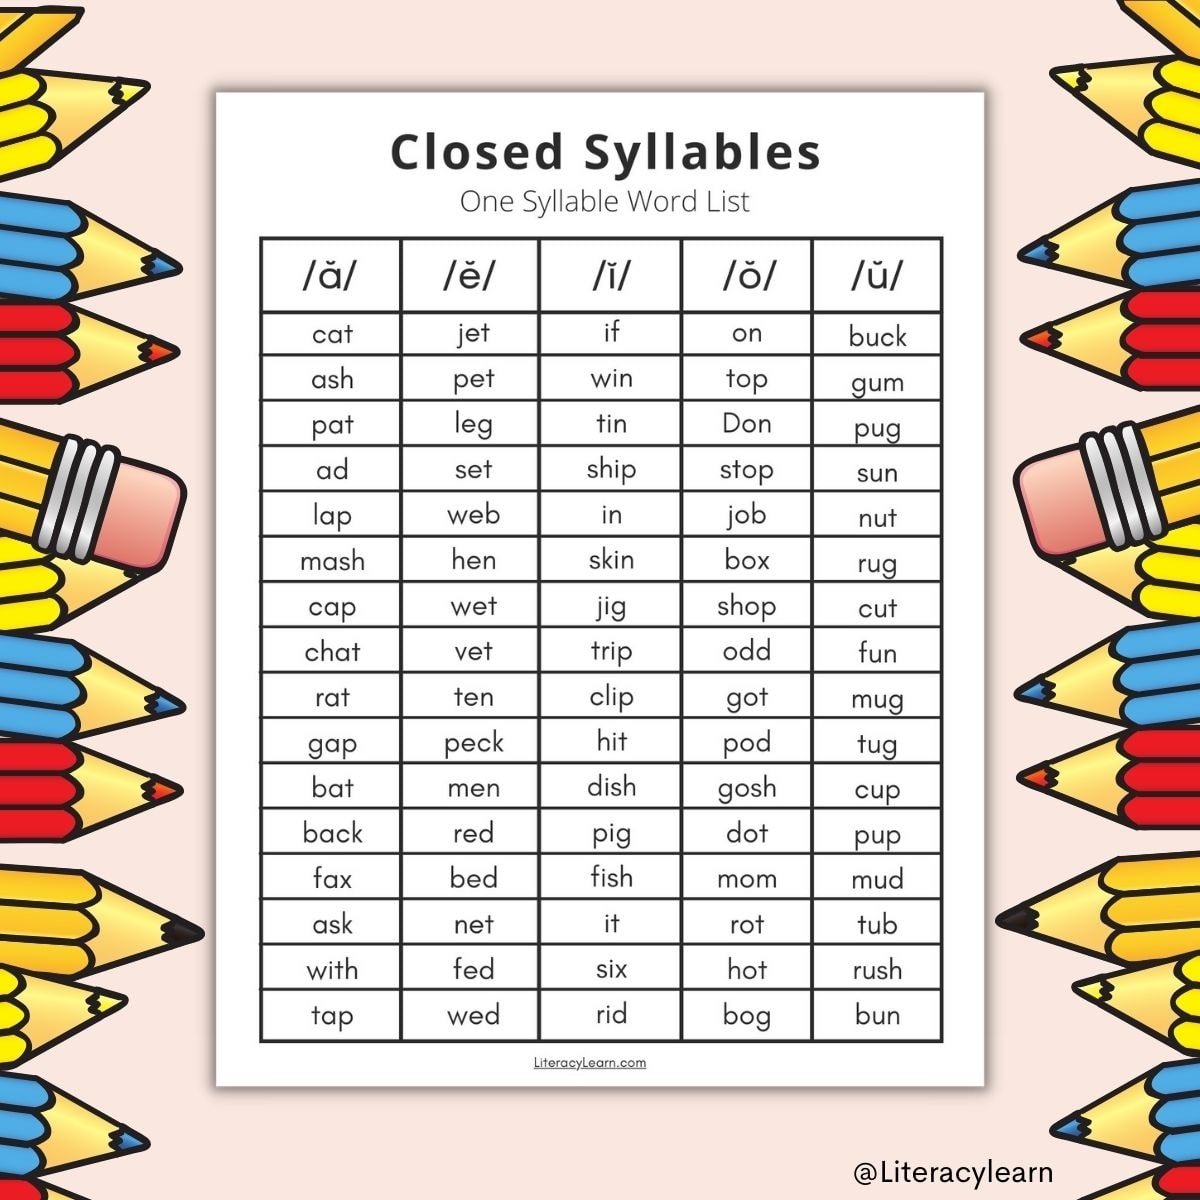 80-closed-syllable-words-word-list-free-printable-literacy-learn